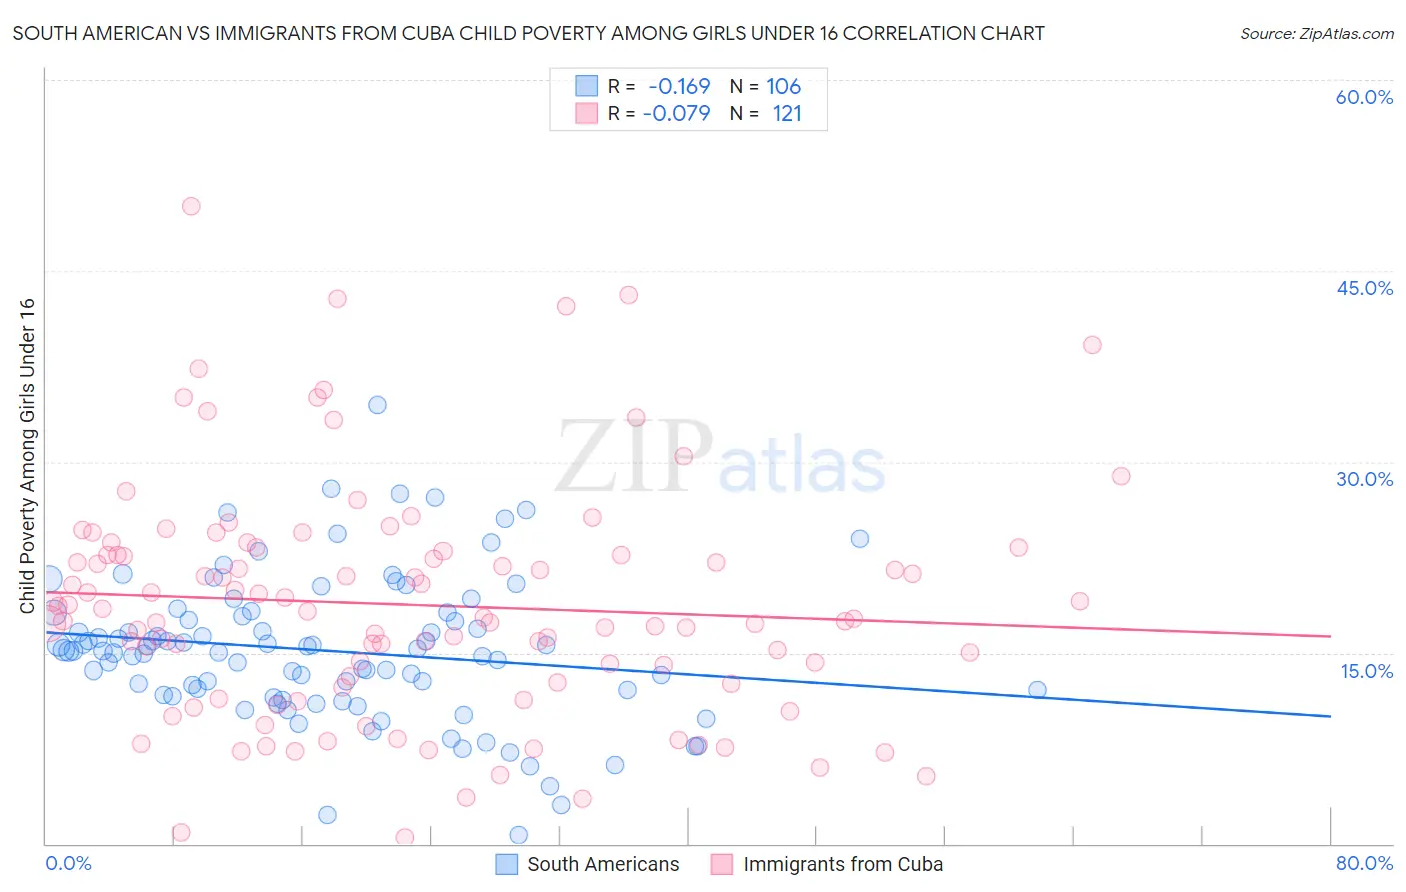 South American vs Immigrants from Cuba Child Poverty Among Girls Under 16